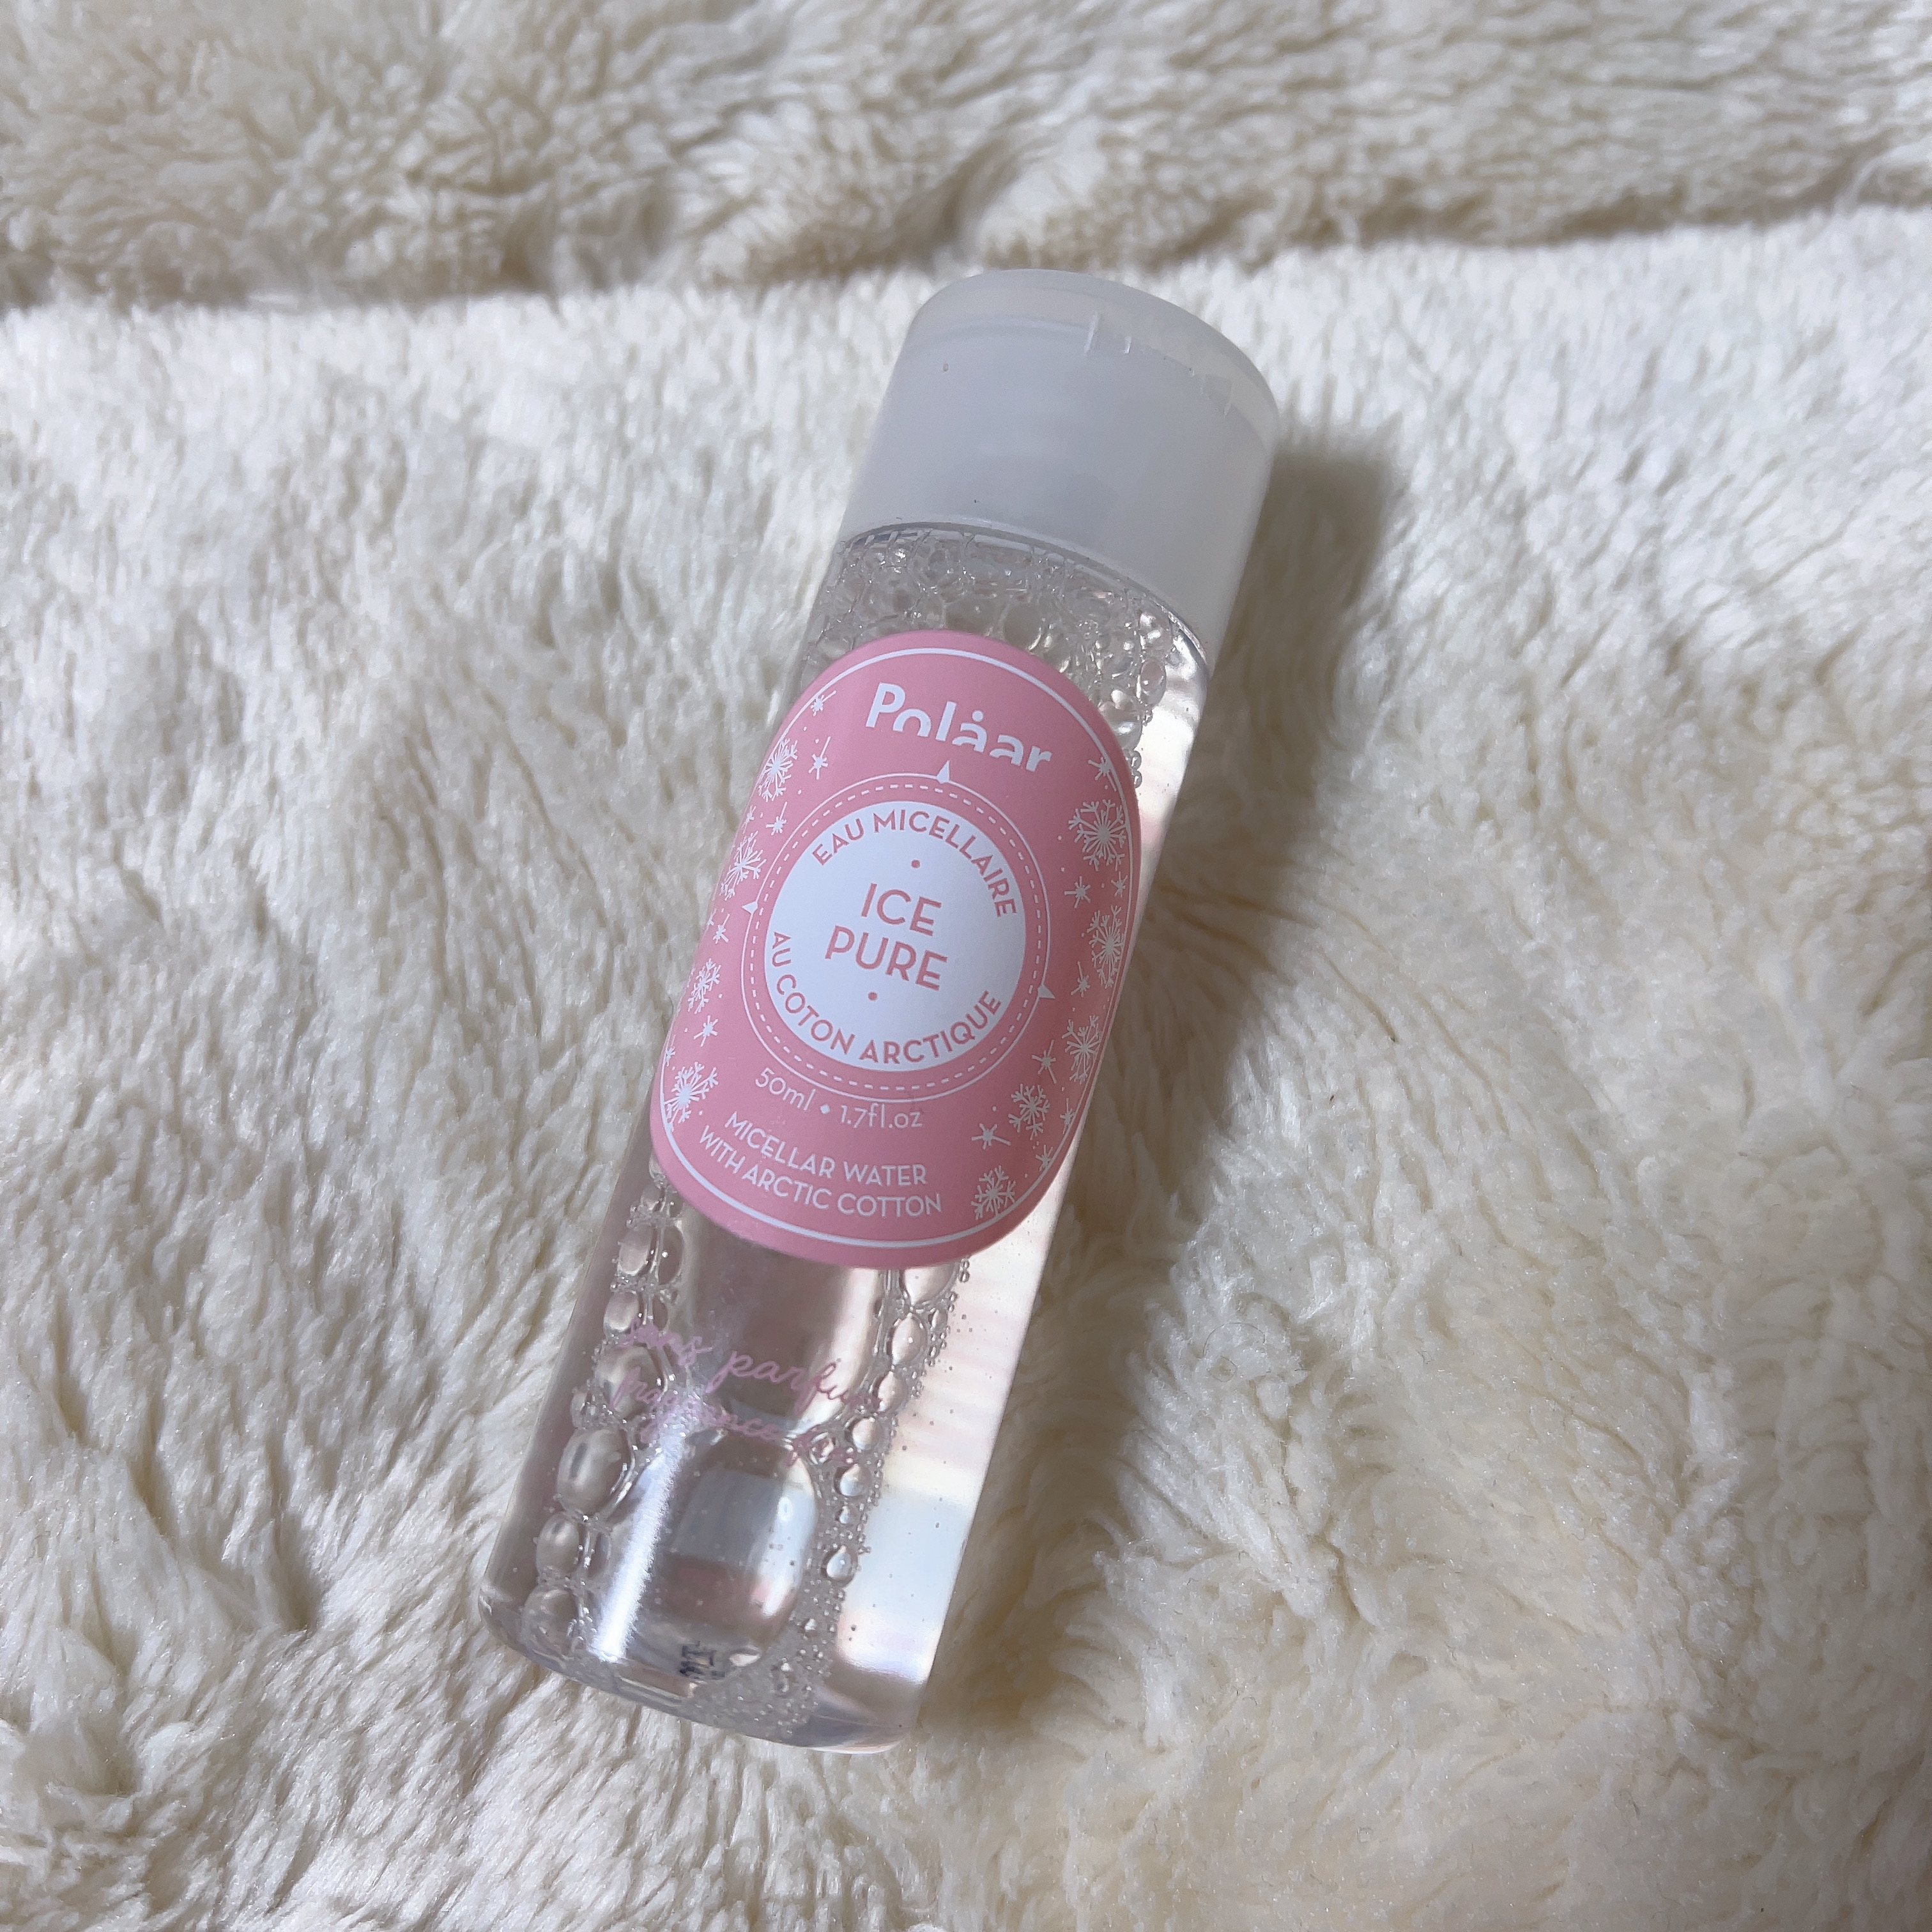 polaarmicellar water with arctic cottonを使ったyungさんのクチコミ画像1